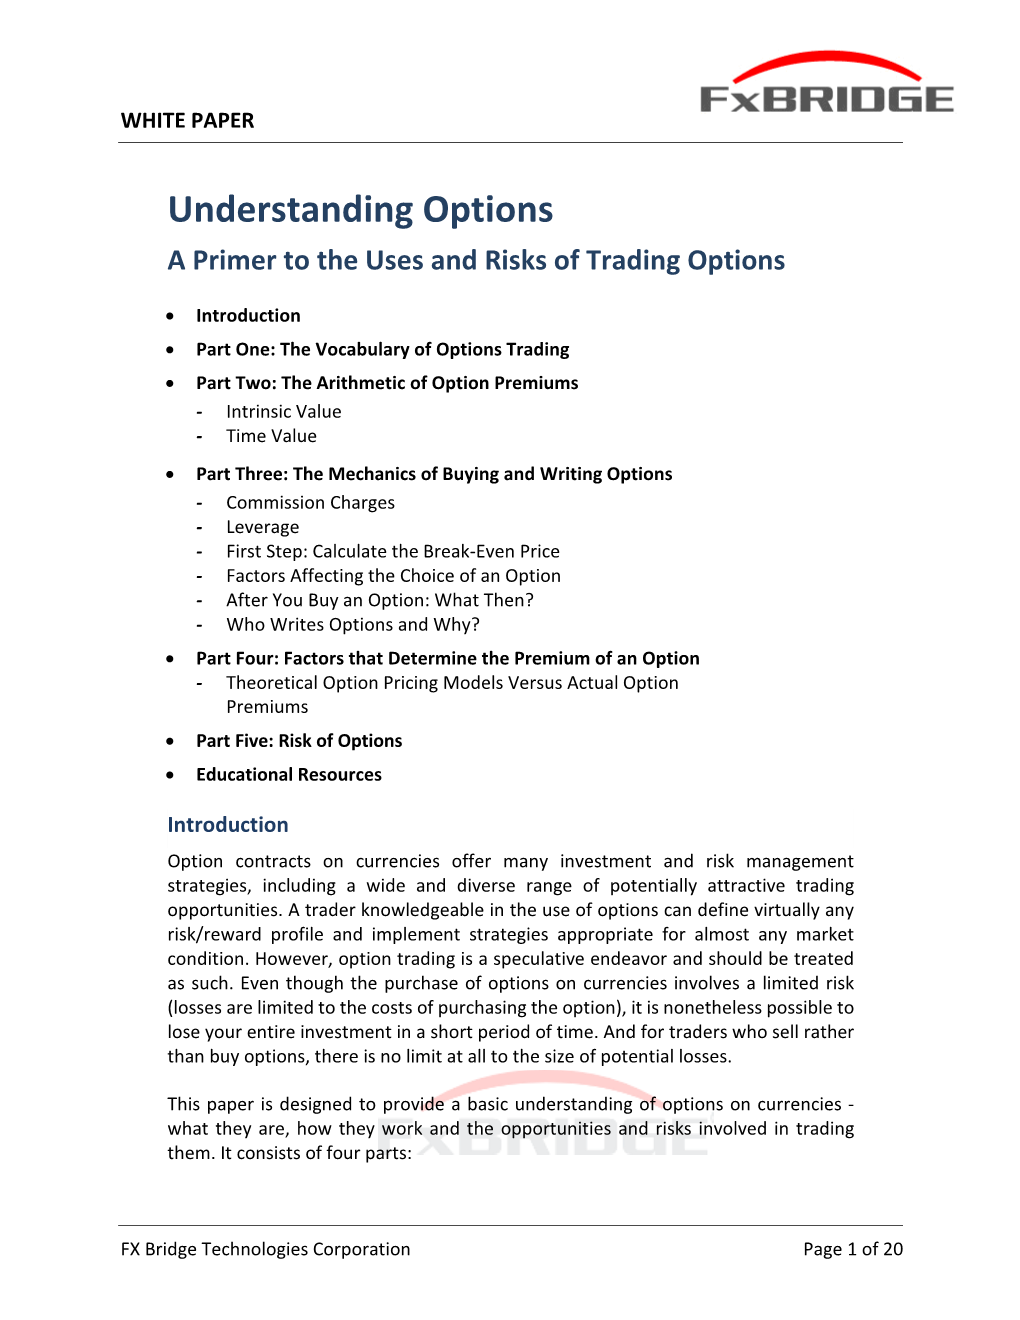 Understanding Options a Primer to the Uses and Risks of Trading Options